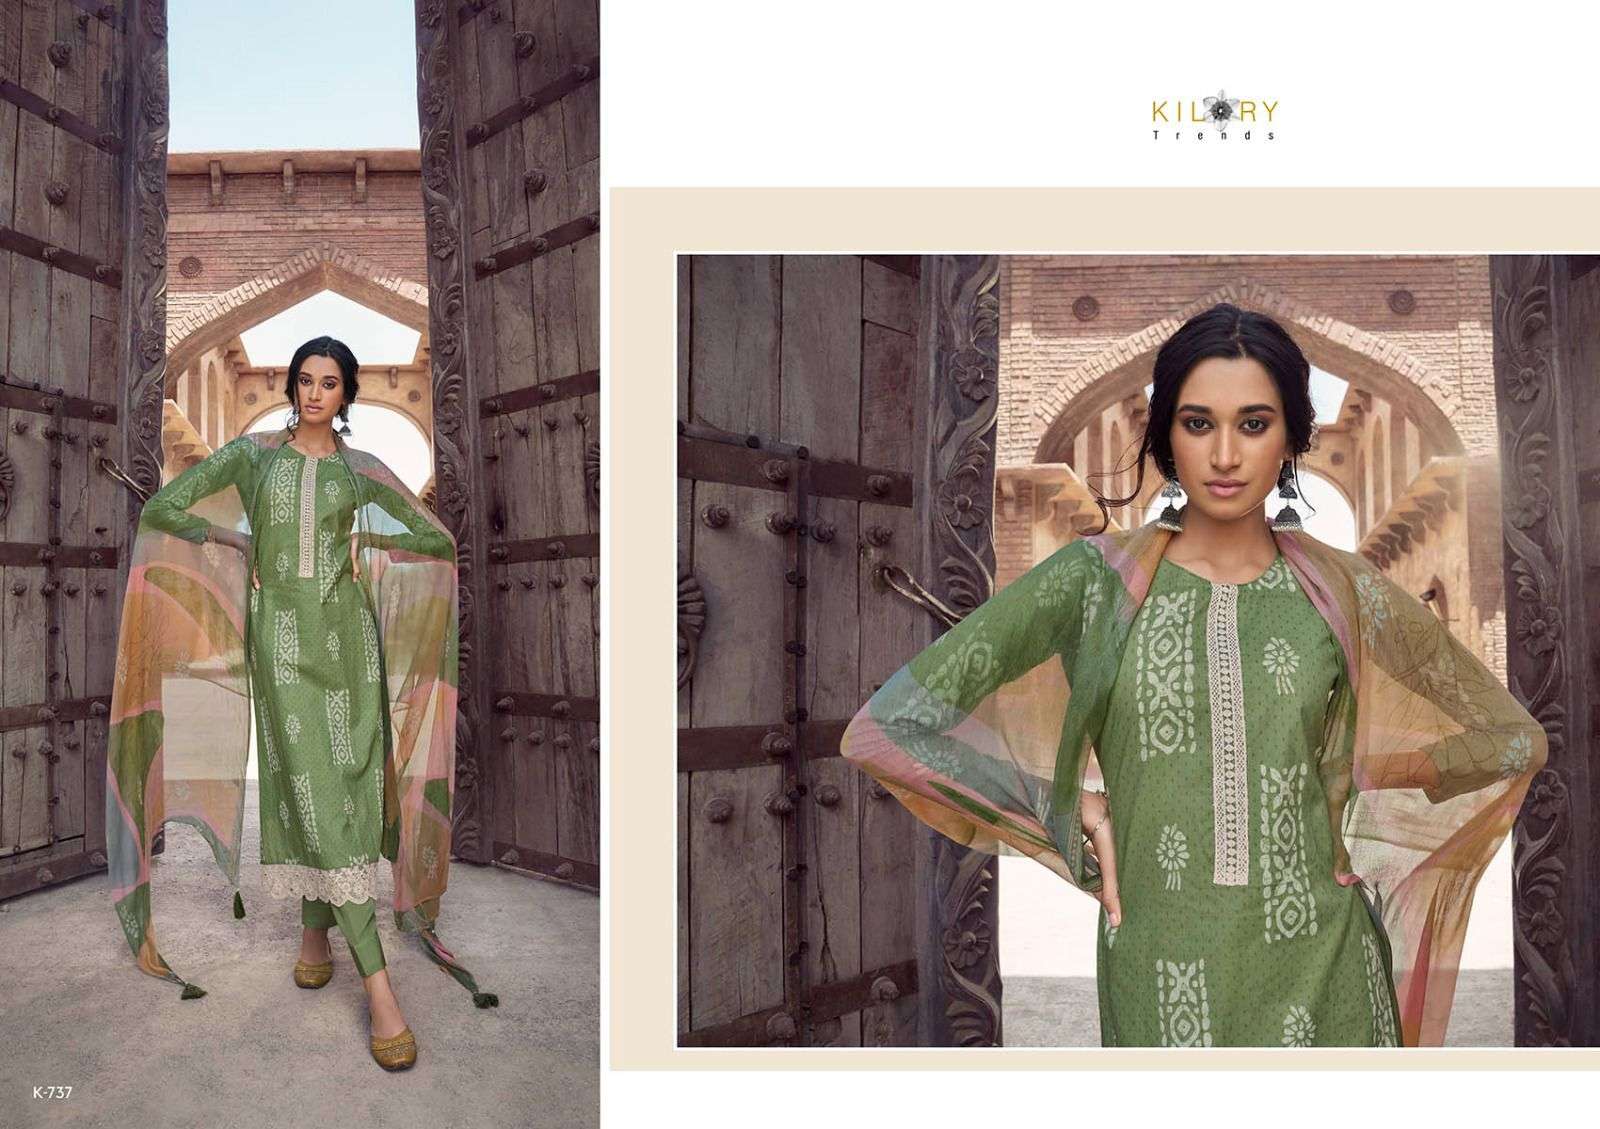 Essence By Kilory 731 To 738 Series Beautiful Suits Colorful Stylish Fancy Casual Wear & Ethnic Wear Pure Lawn Cotton Dresses At Wholesale Price